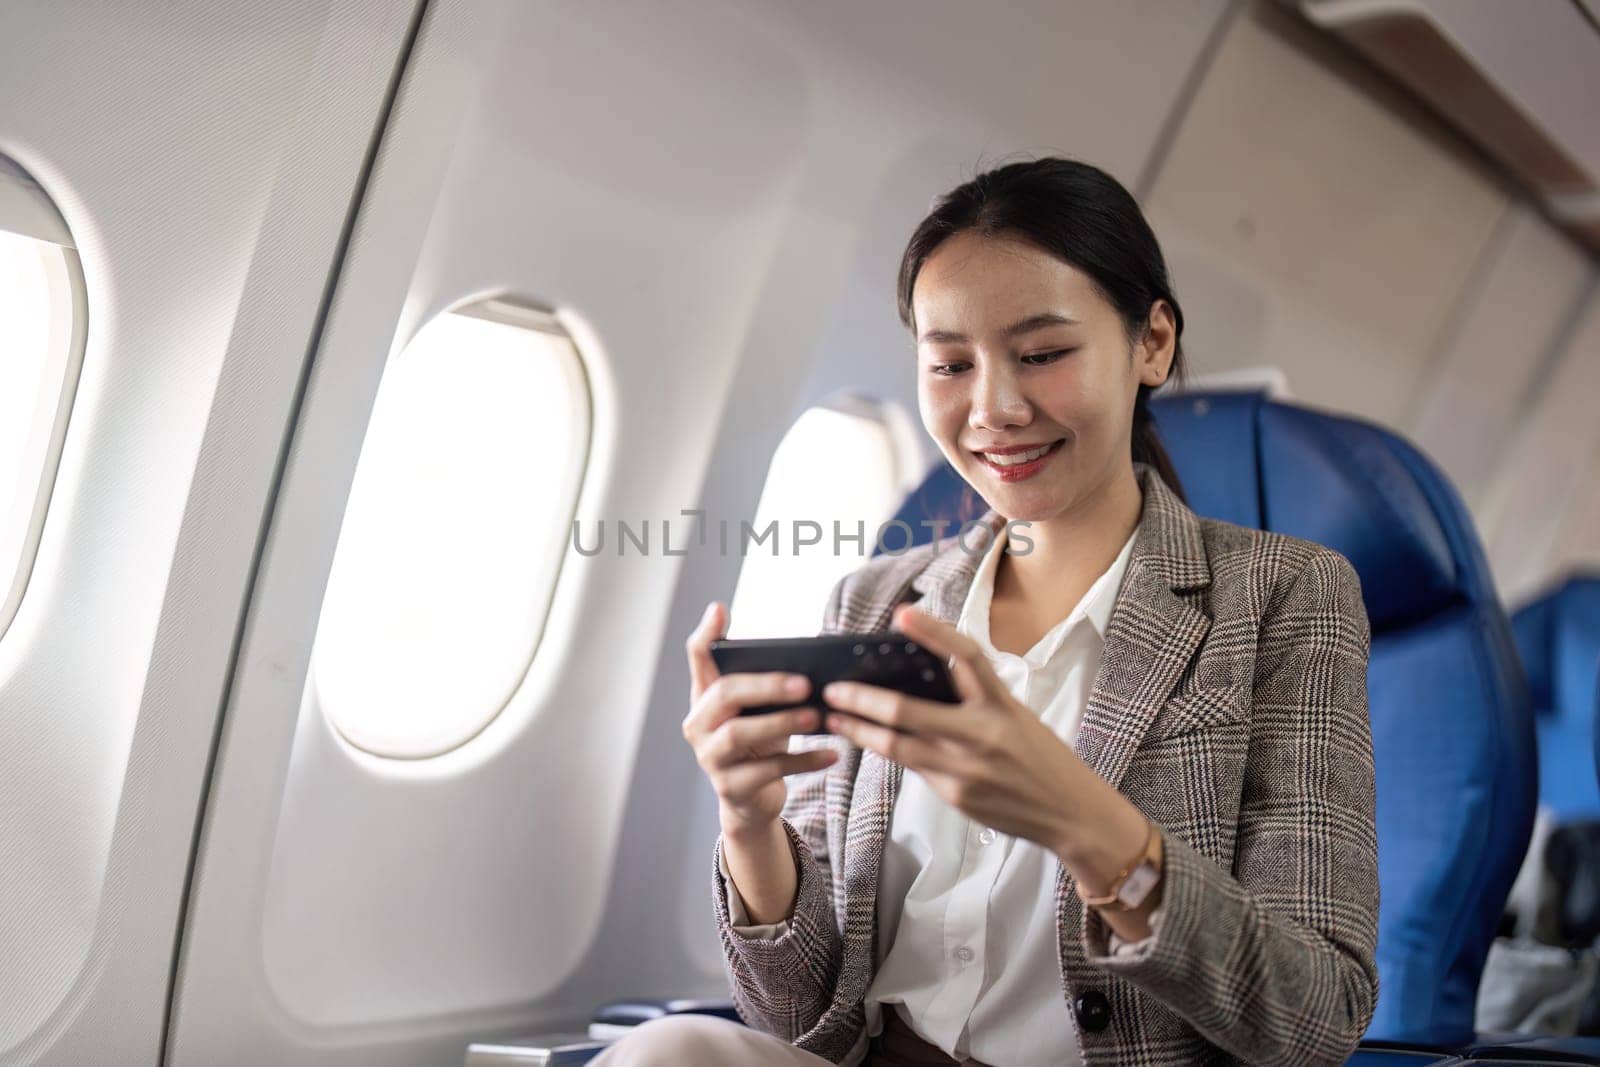 Smiling businesswoman using smartphone on airplane. Concept of in flight communication and business travel.